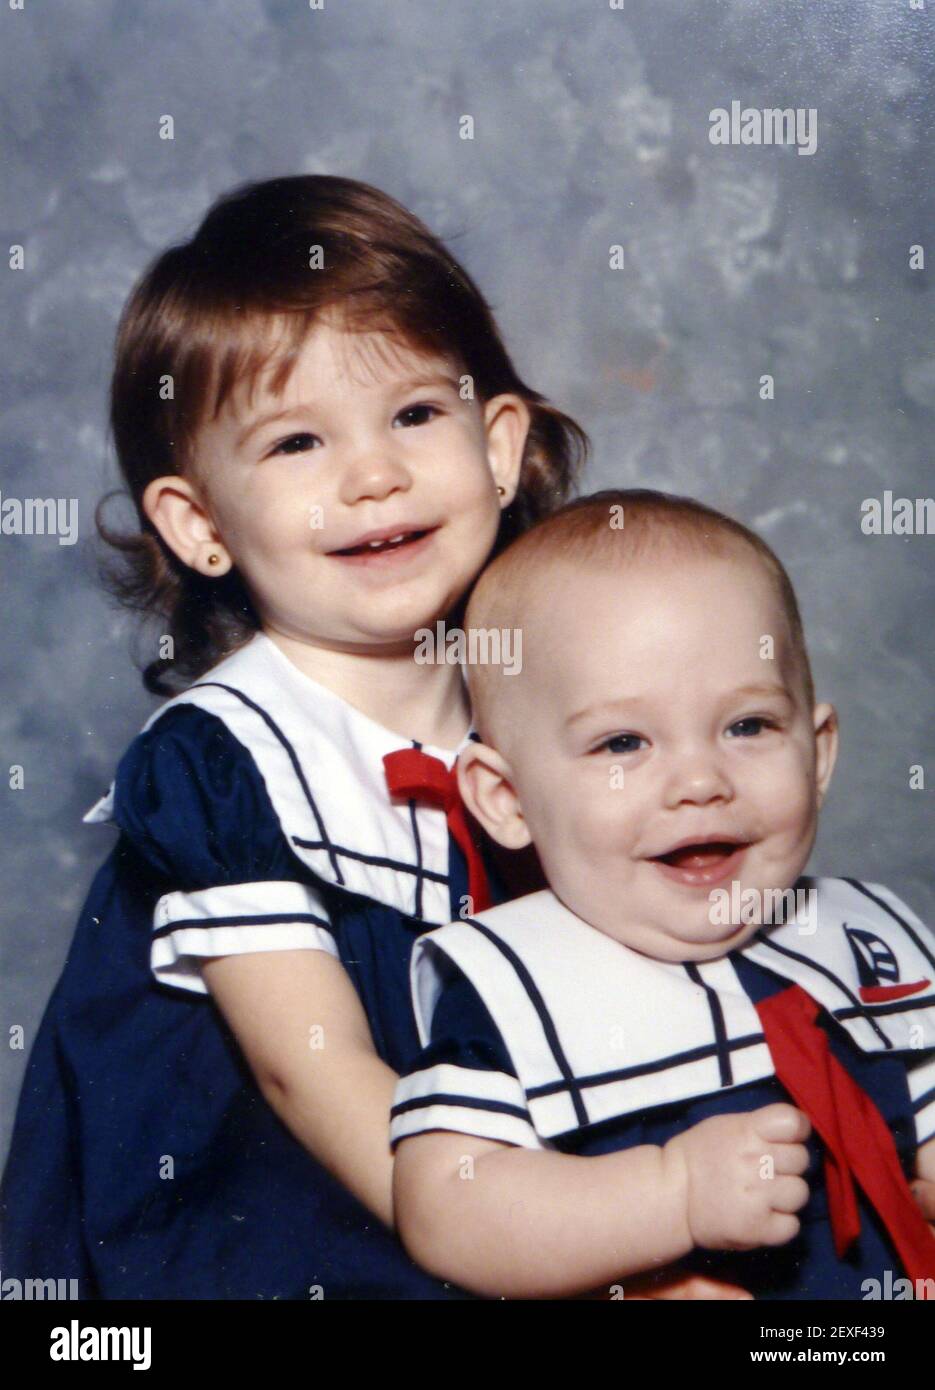 21 May 2015. Laurel, Mississippi. Collect photos of plus size model Tess Holliday (formerly known as Tess Munster, nÃ©e Ryann Hoven) in her formative years from a family album. Tass and her baby brother Tad. Photo credit; Tadlock Charley Varley *** Please Use Credit from Credit Field *** Stock Photo